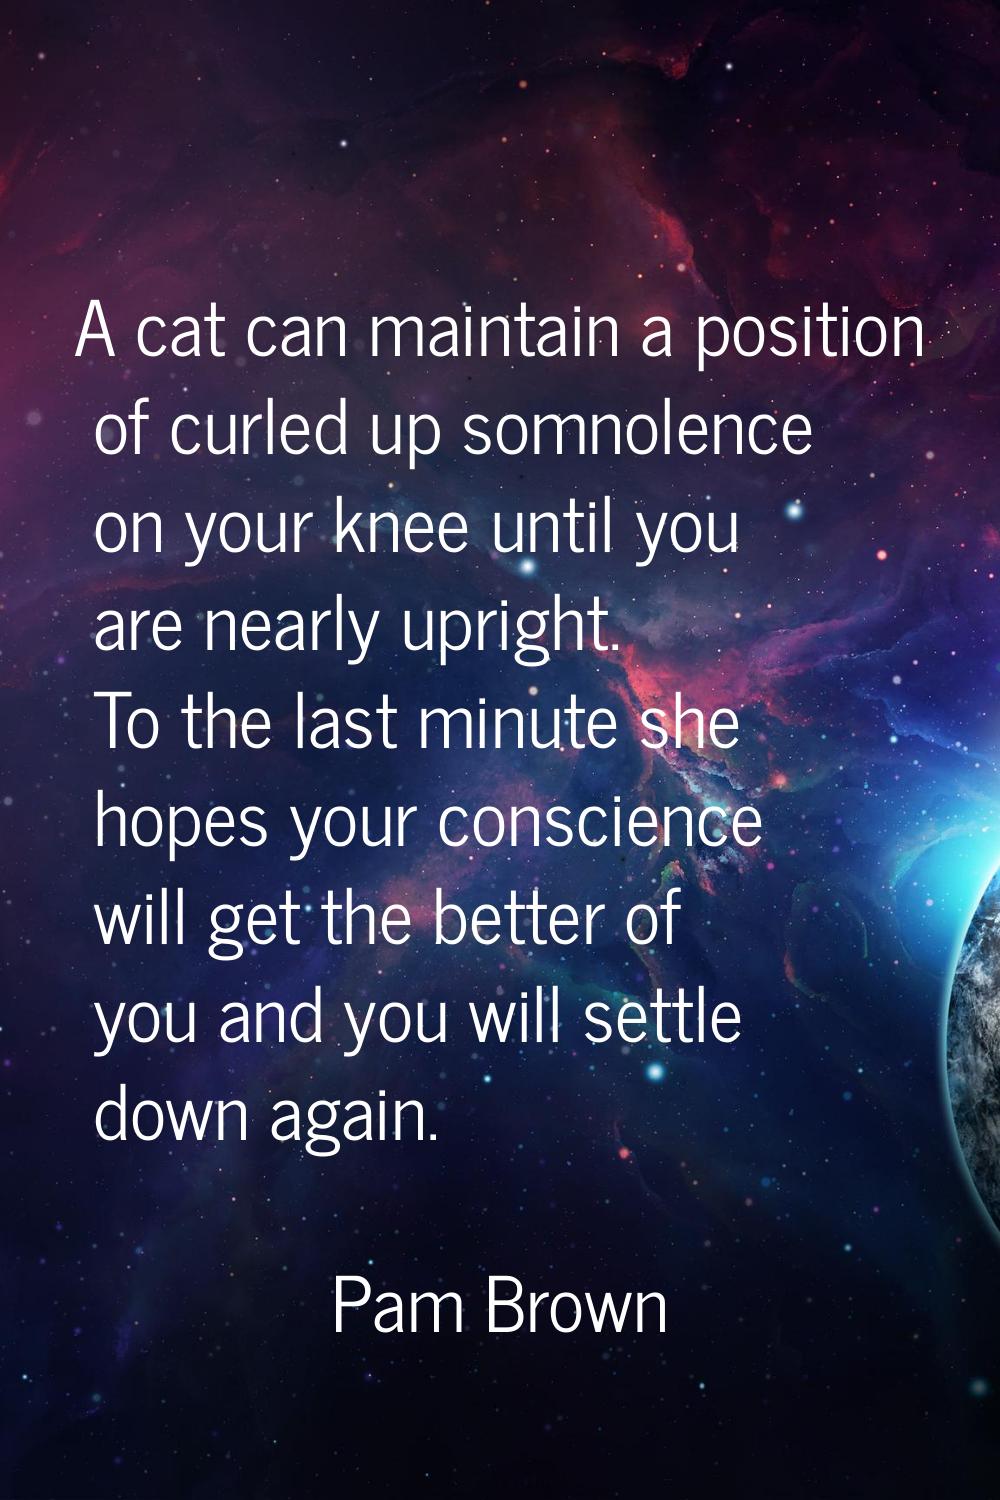 A cat can maintain a position of curled up somnolence on your knee until you are nearly upright. To